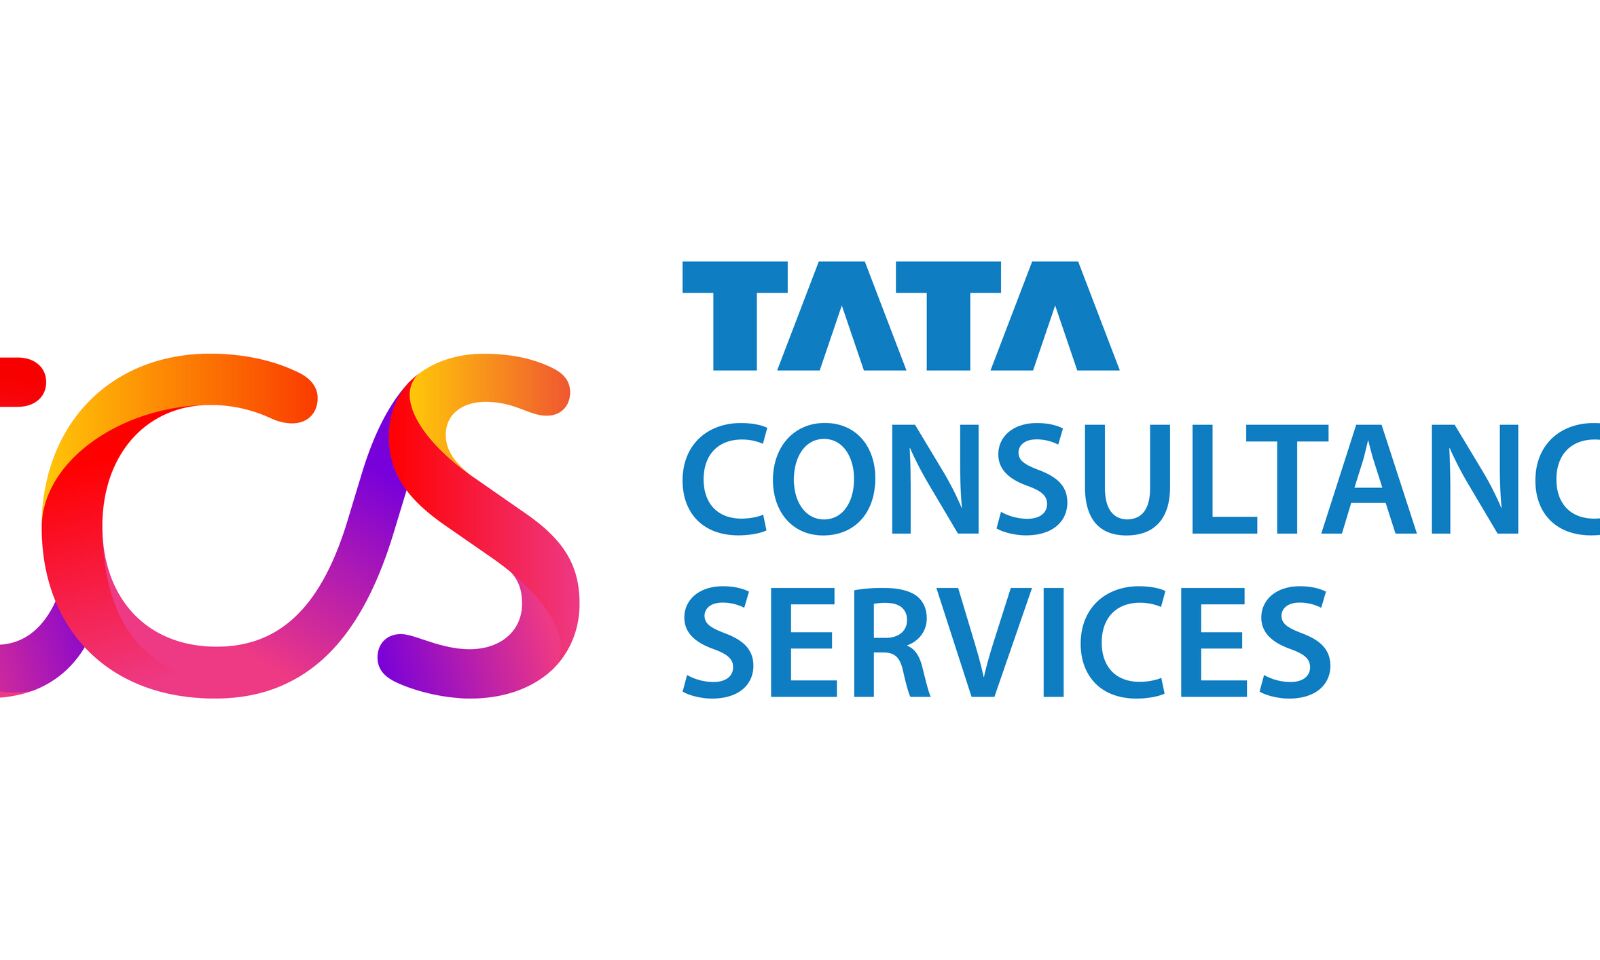 Neha Pandey - Assistant System Engineer - Tata Consultancy Services |  LinkedIn